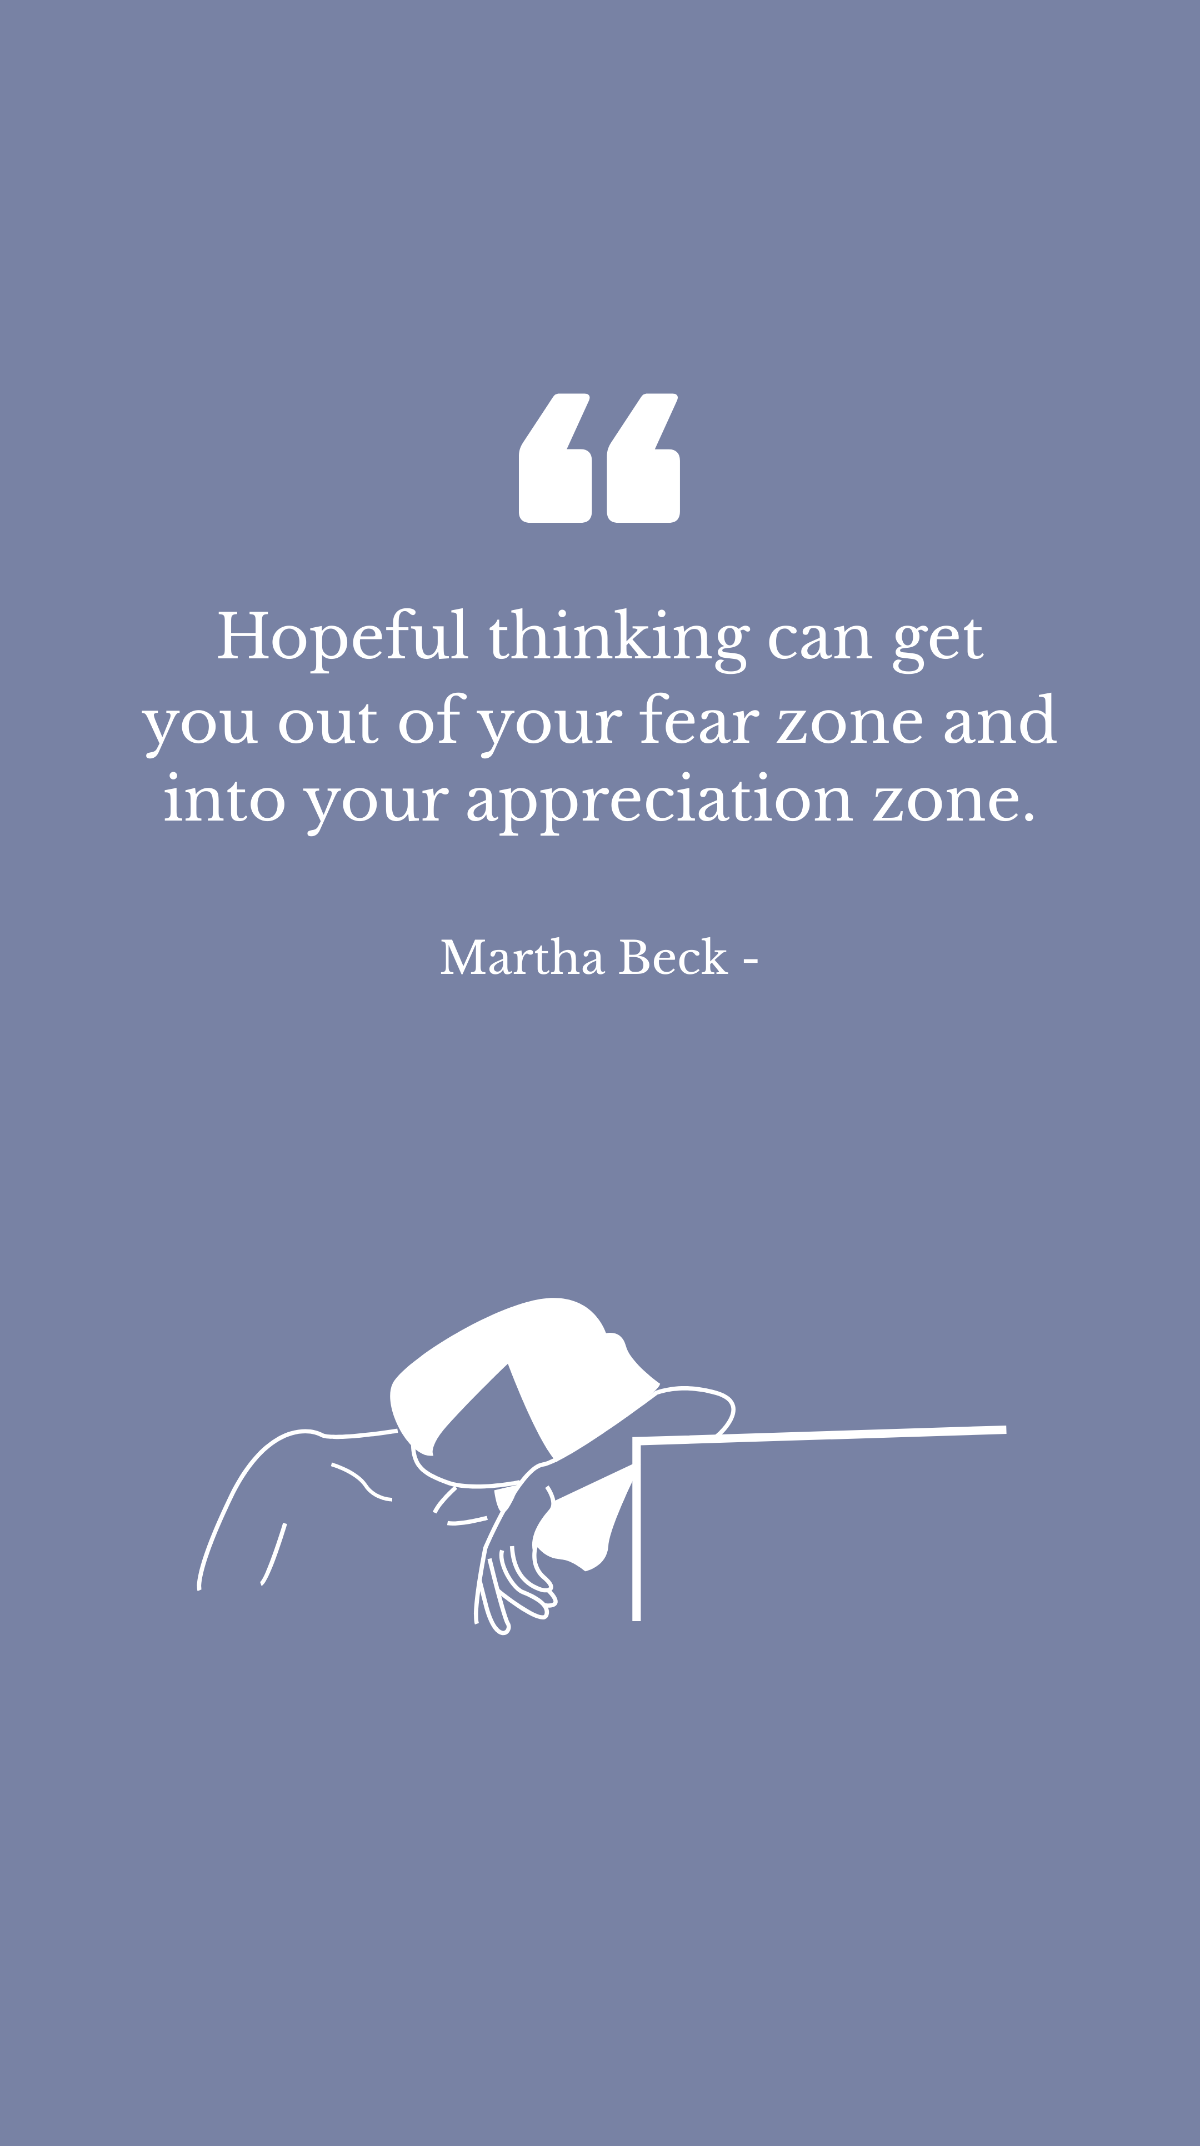 Free Martha Beck - Hopeful thinking can get you out of your fear zone and into your appreciation zone. Template